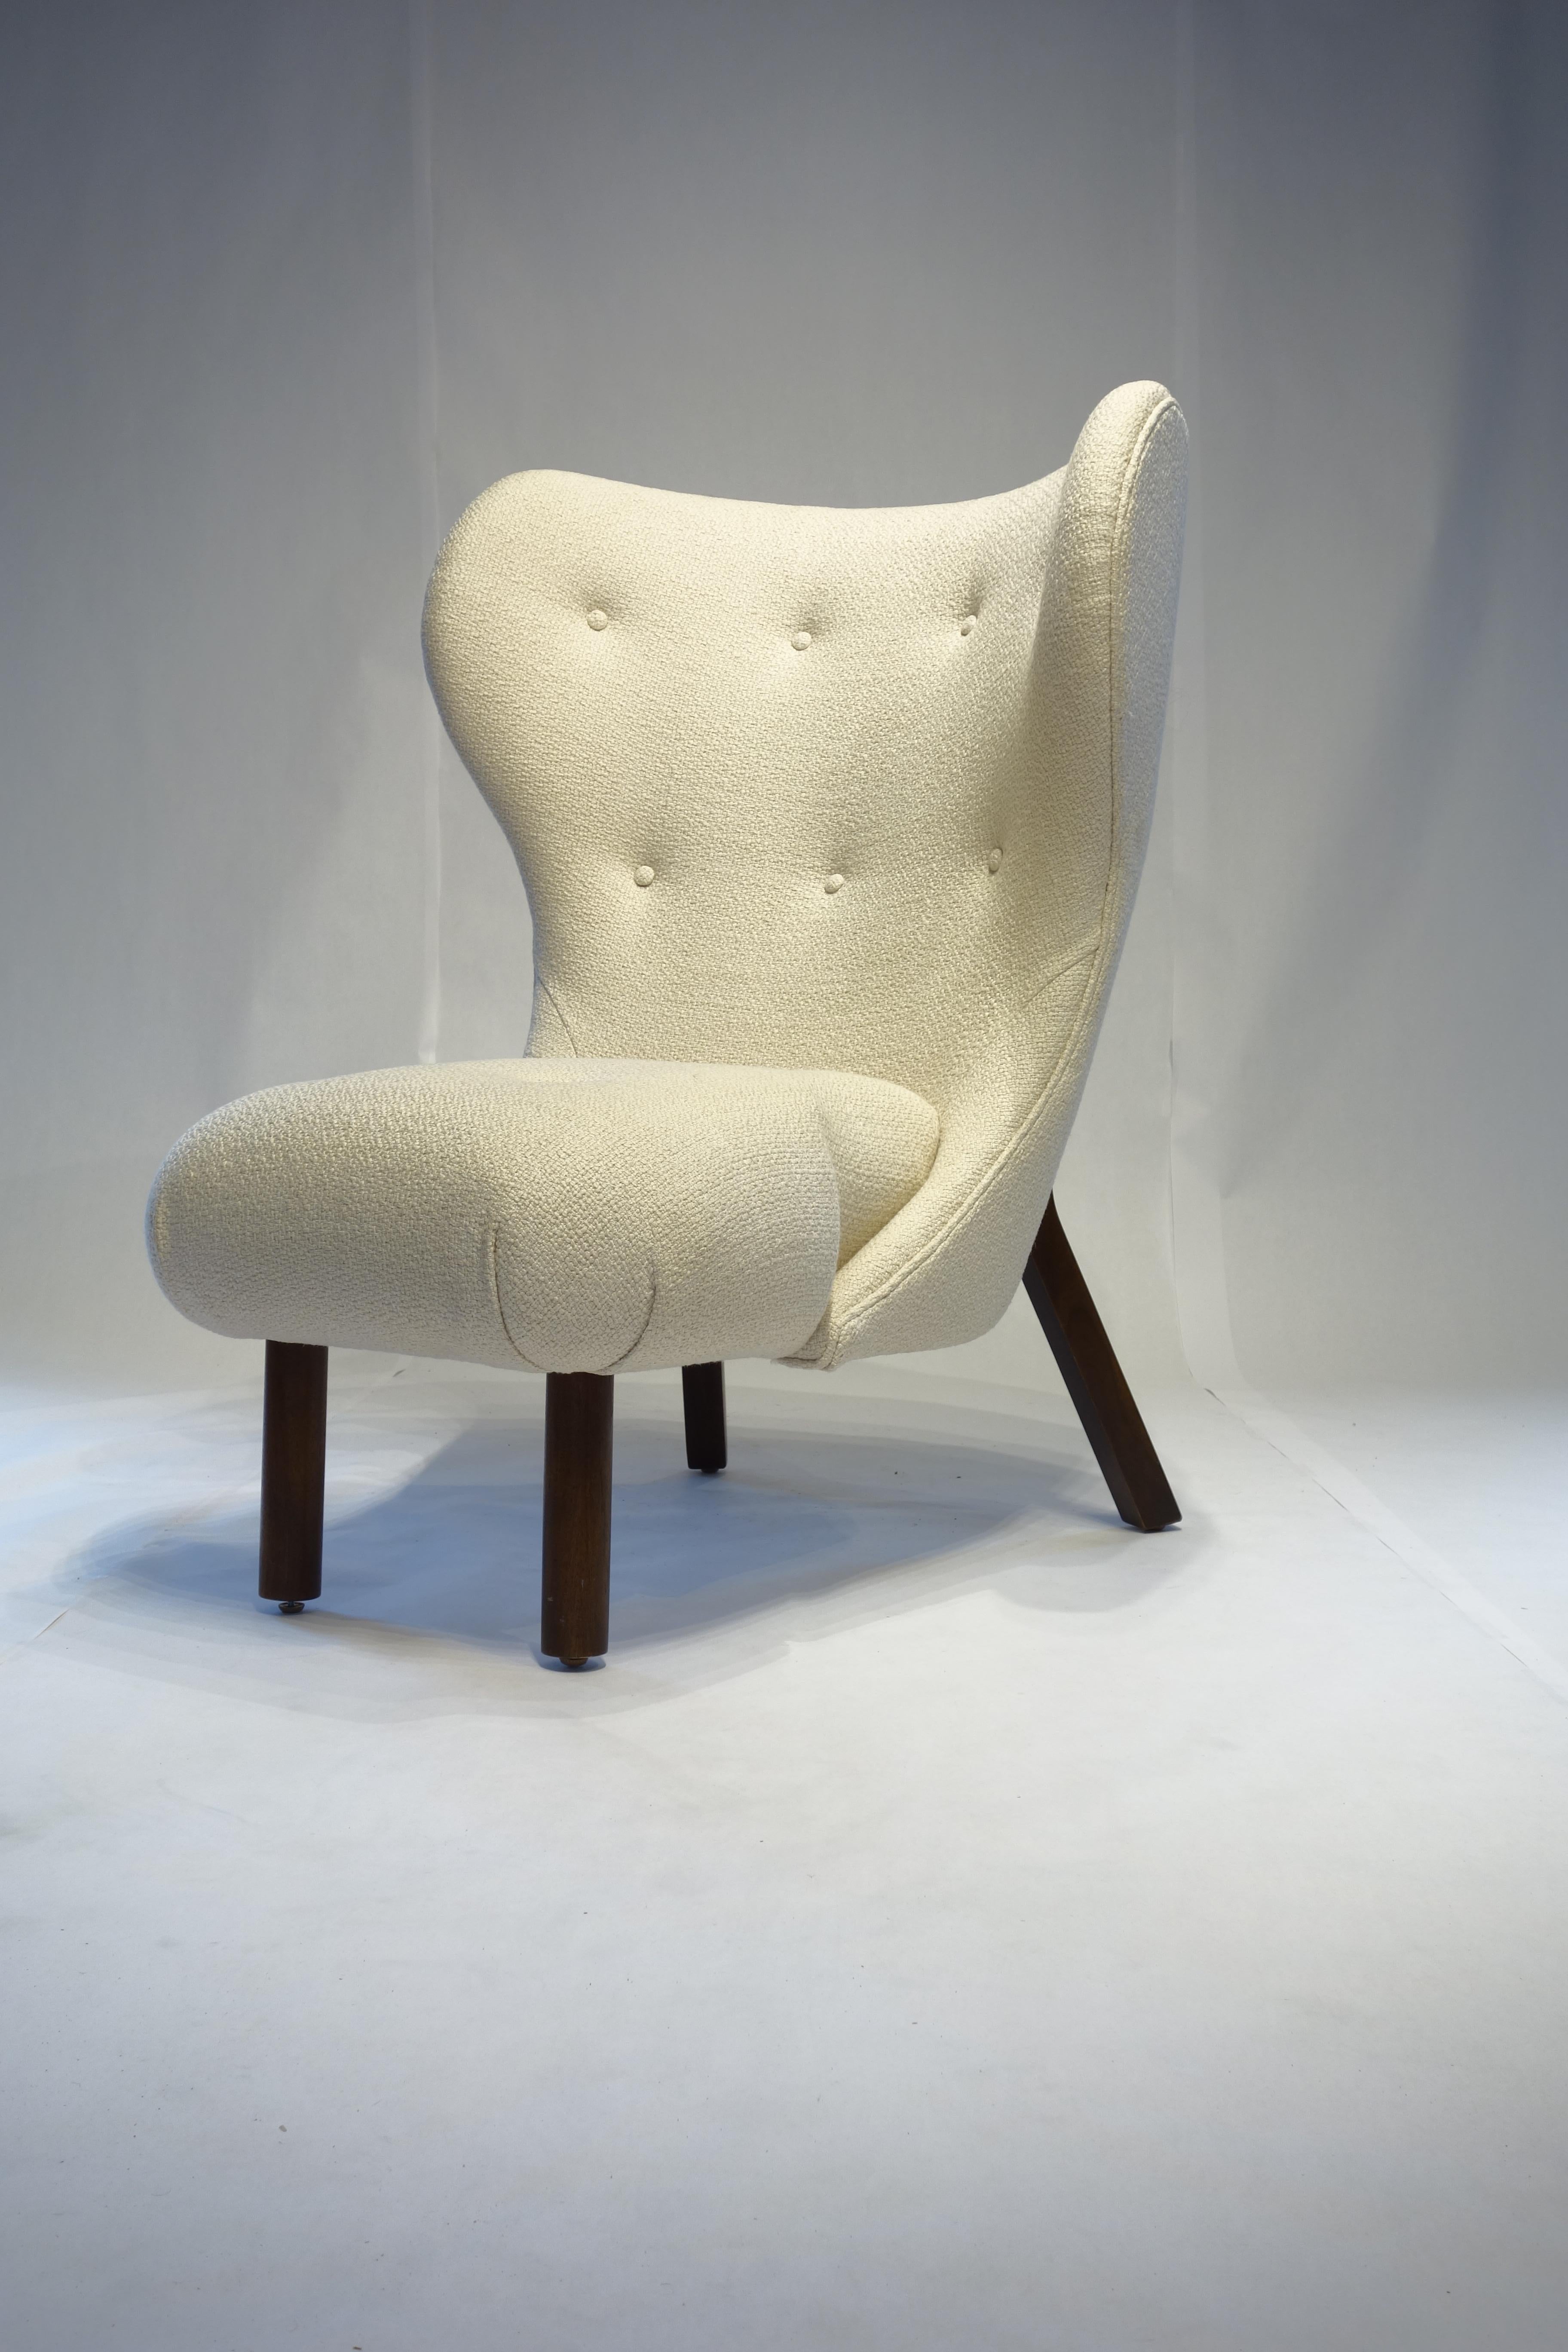 Linen 21 Century Fresh Pond Mod Wing Chair by Michael Del Piero, Made to Order For Sale